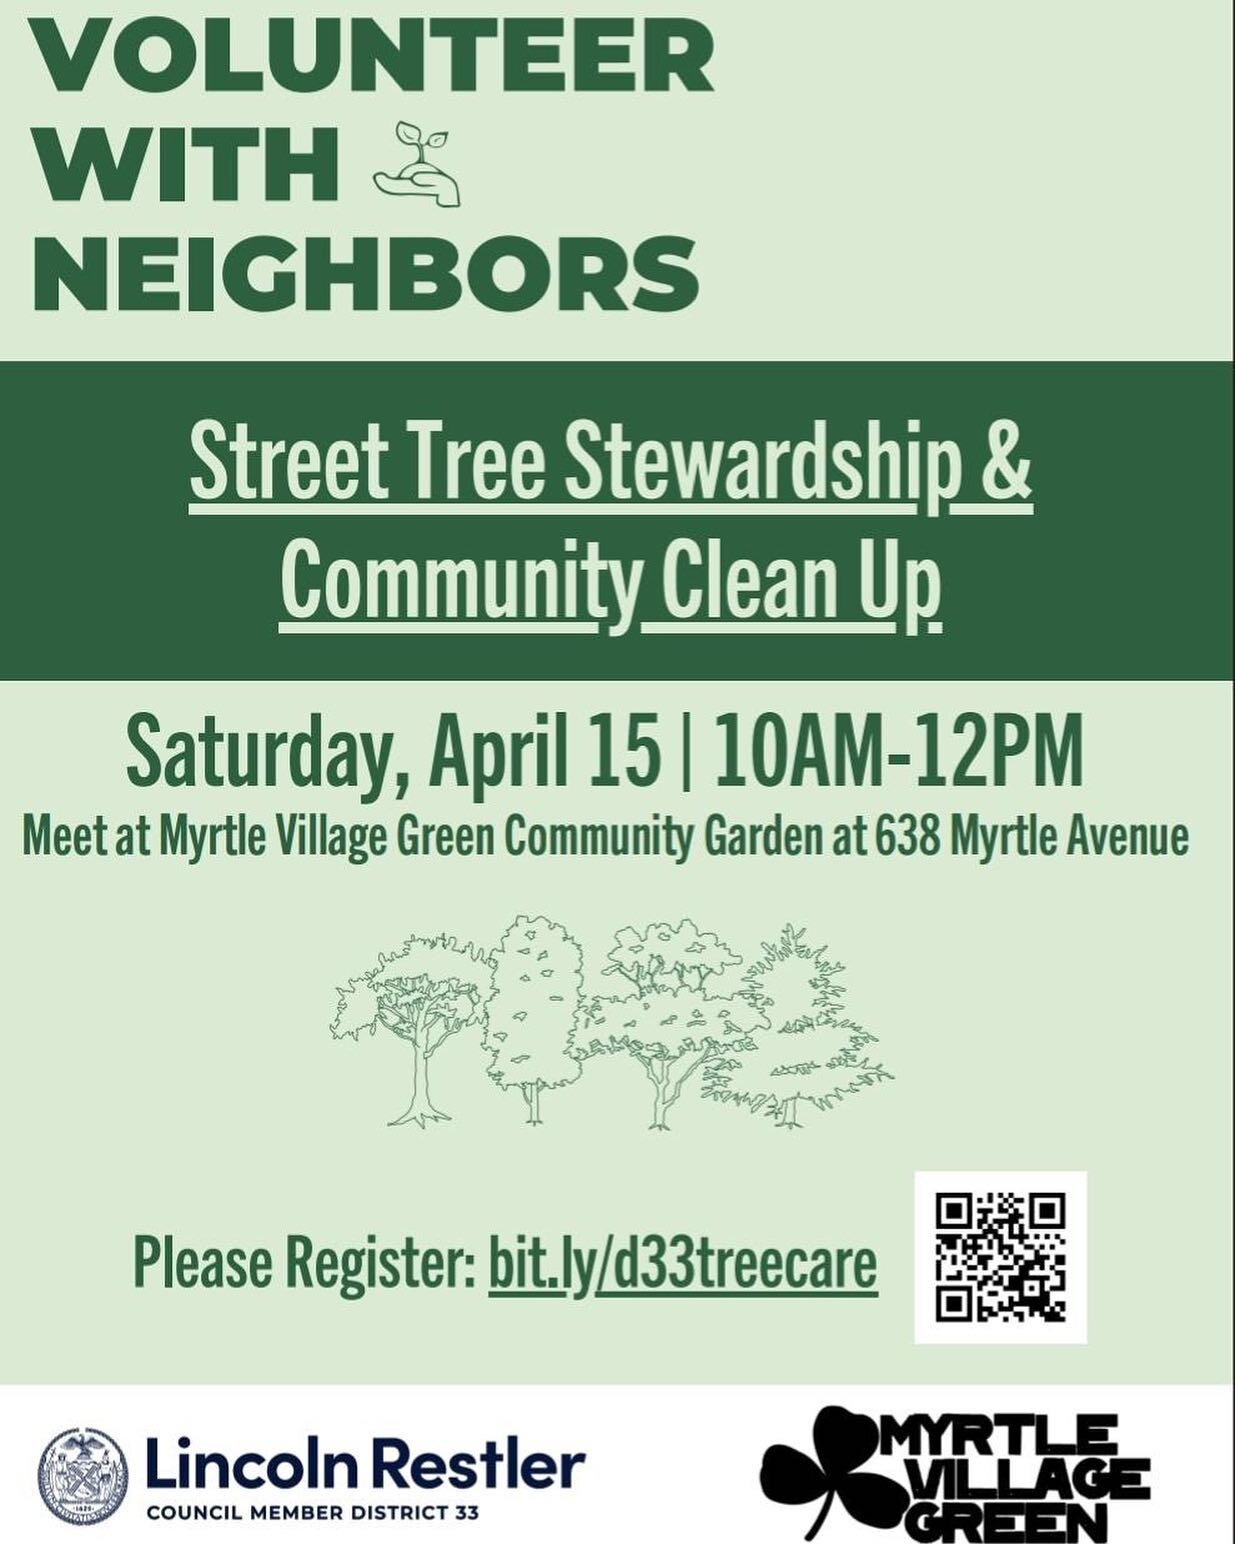 We would like to share this opportunity to volunteer in the community.

Tree bed care + community cleanup.
This will include adding compost &amp; mulch to tree beds.
🌳&hearts;️🧹

Saturday, April 15
10:00-12:00
Meet at Myrtle Village Green Community